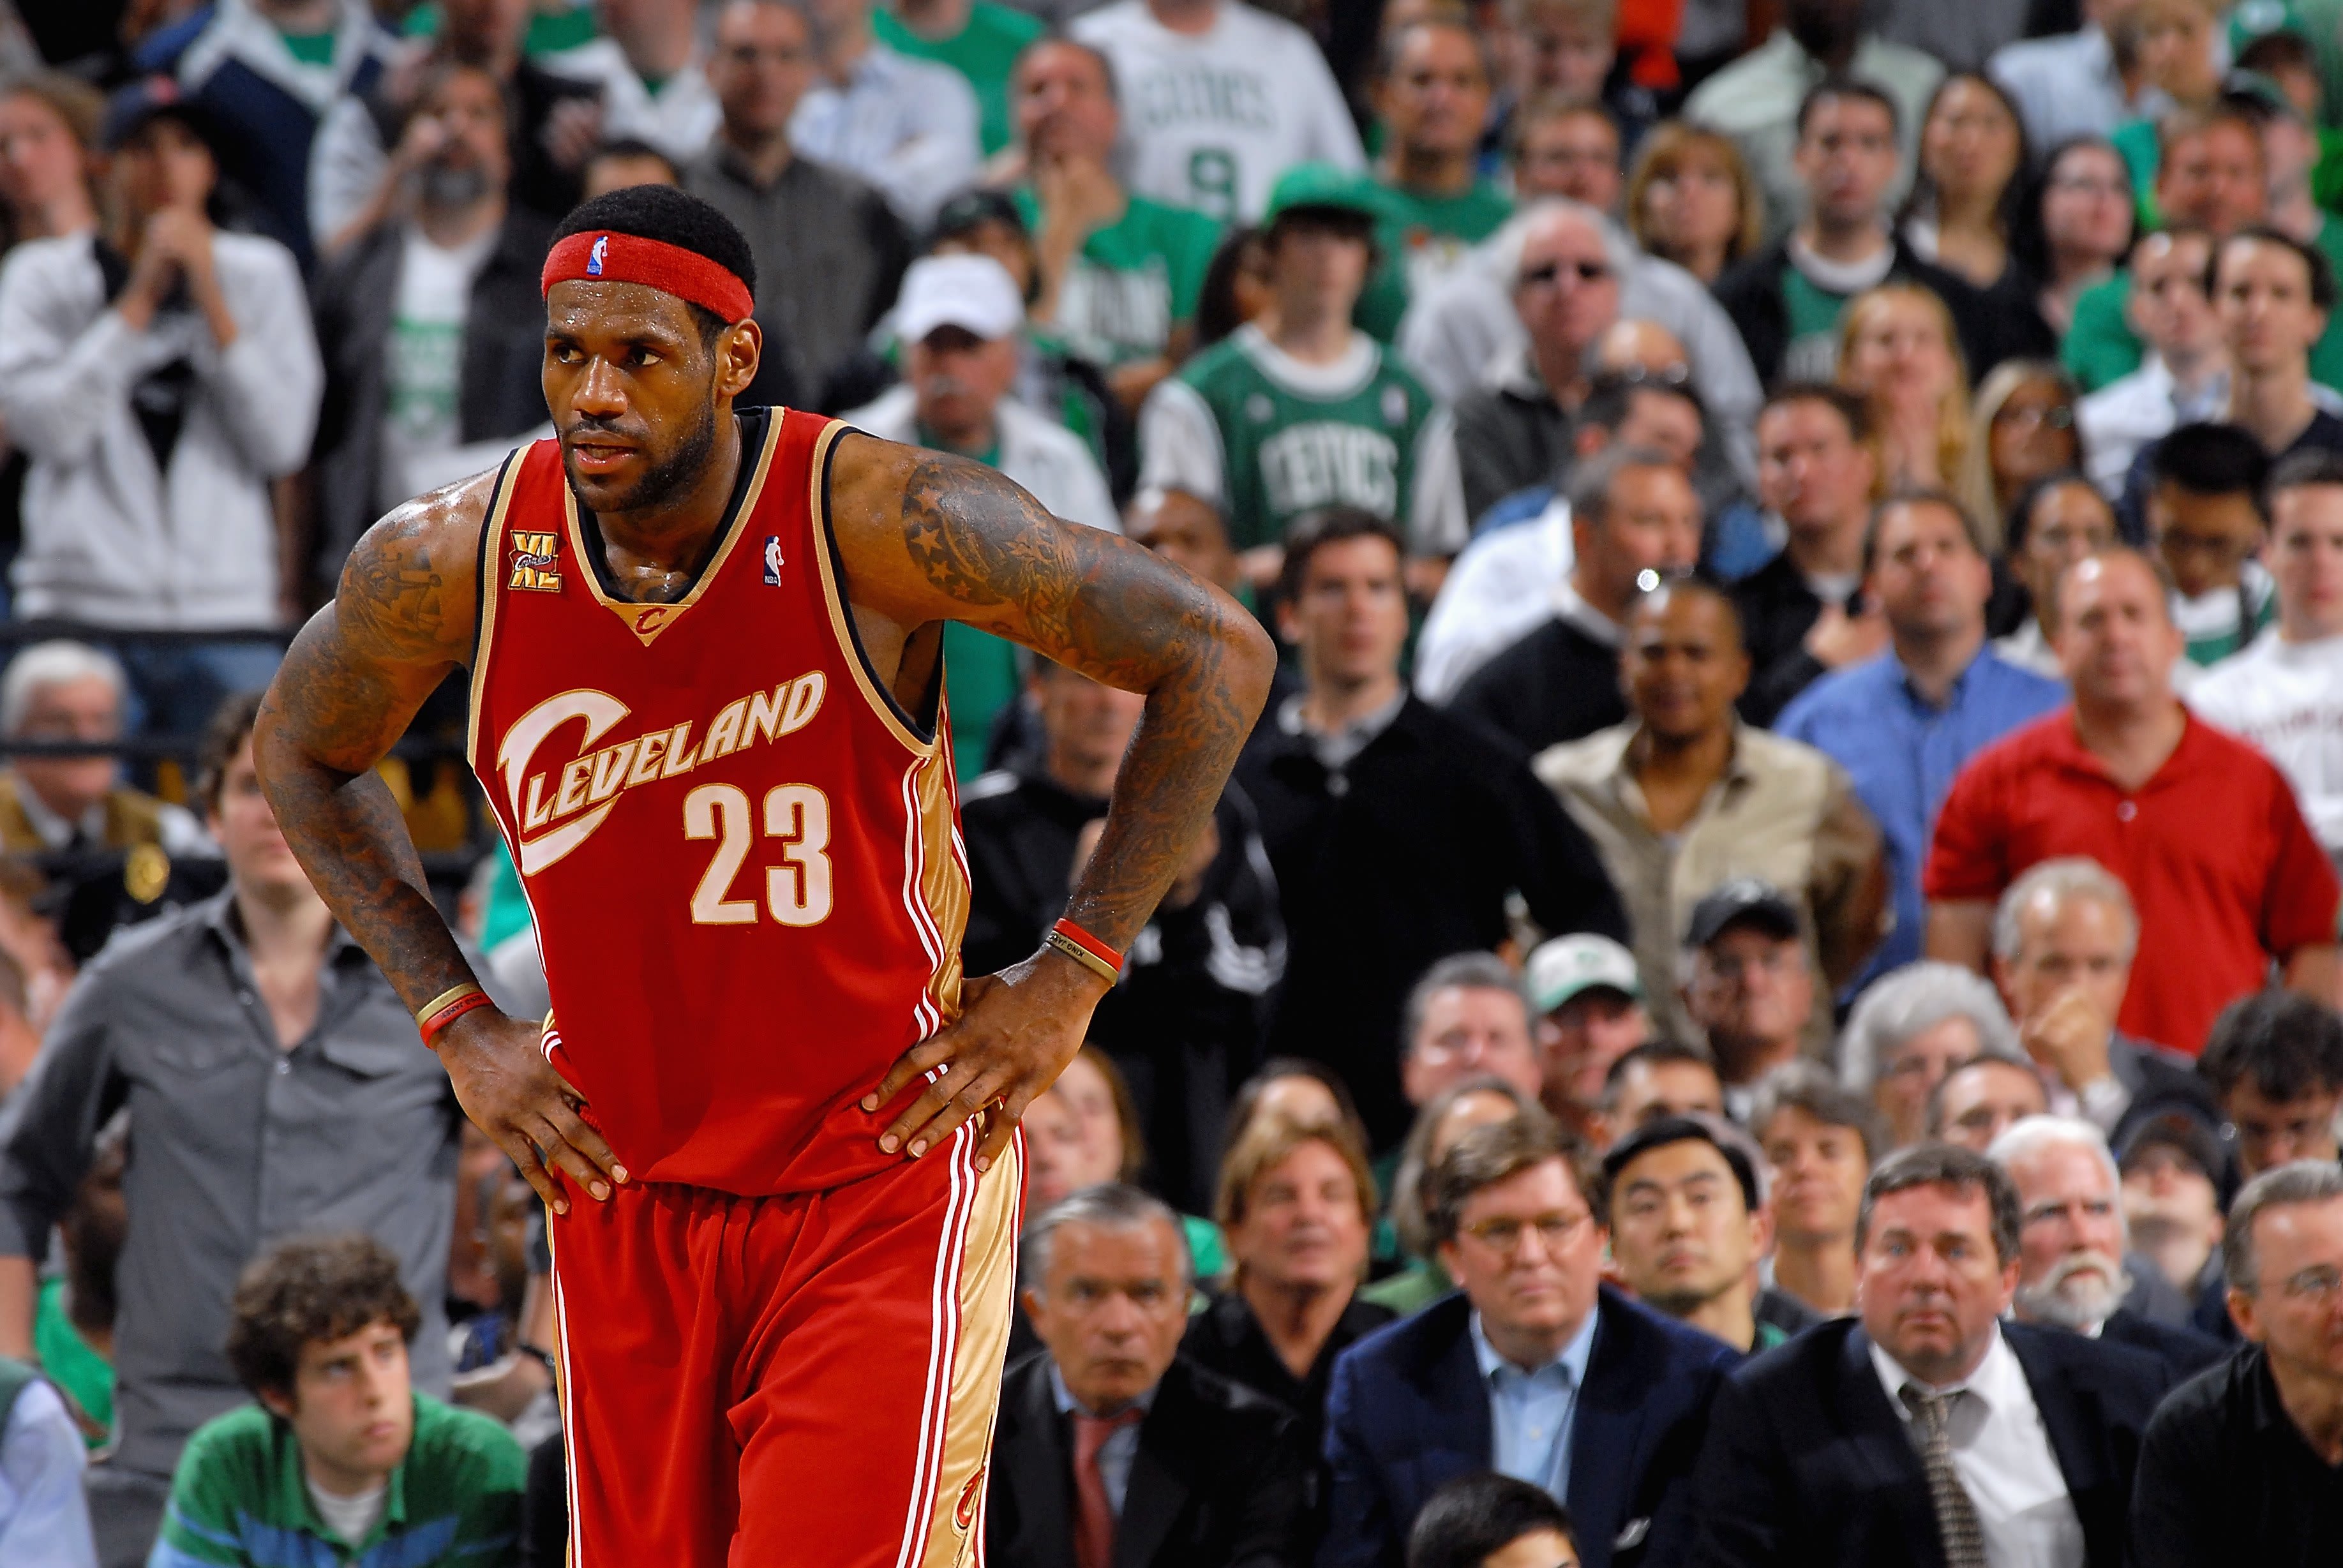 LeBron James plays against the Celtics in 2010.